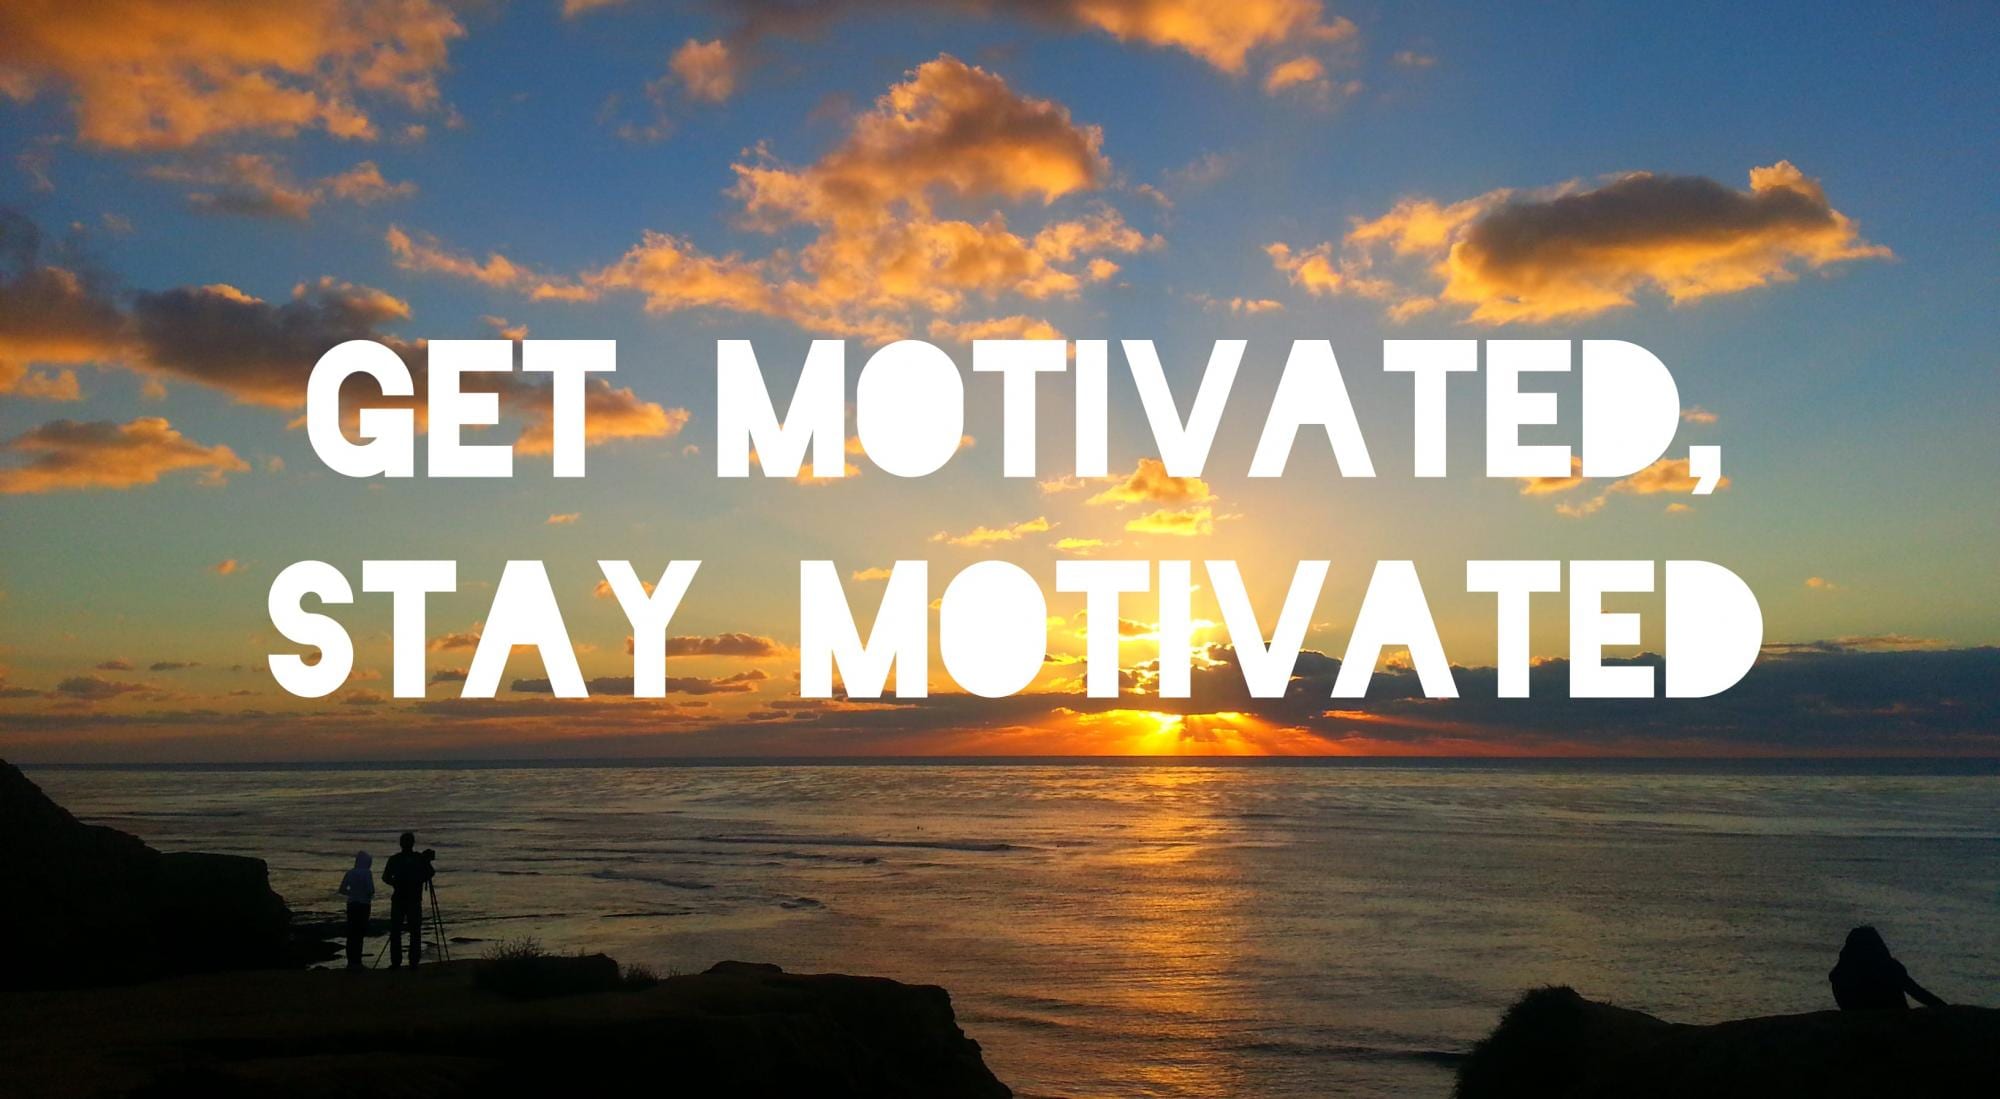 https://dougdvorak.com/16-things-you-can-do-to-stay-motivated/